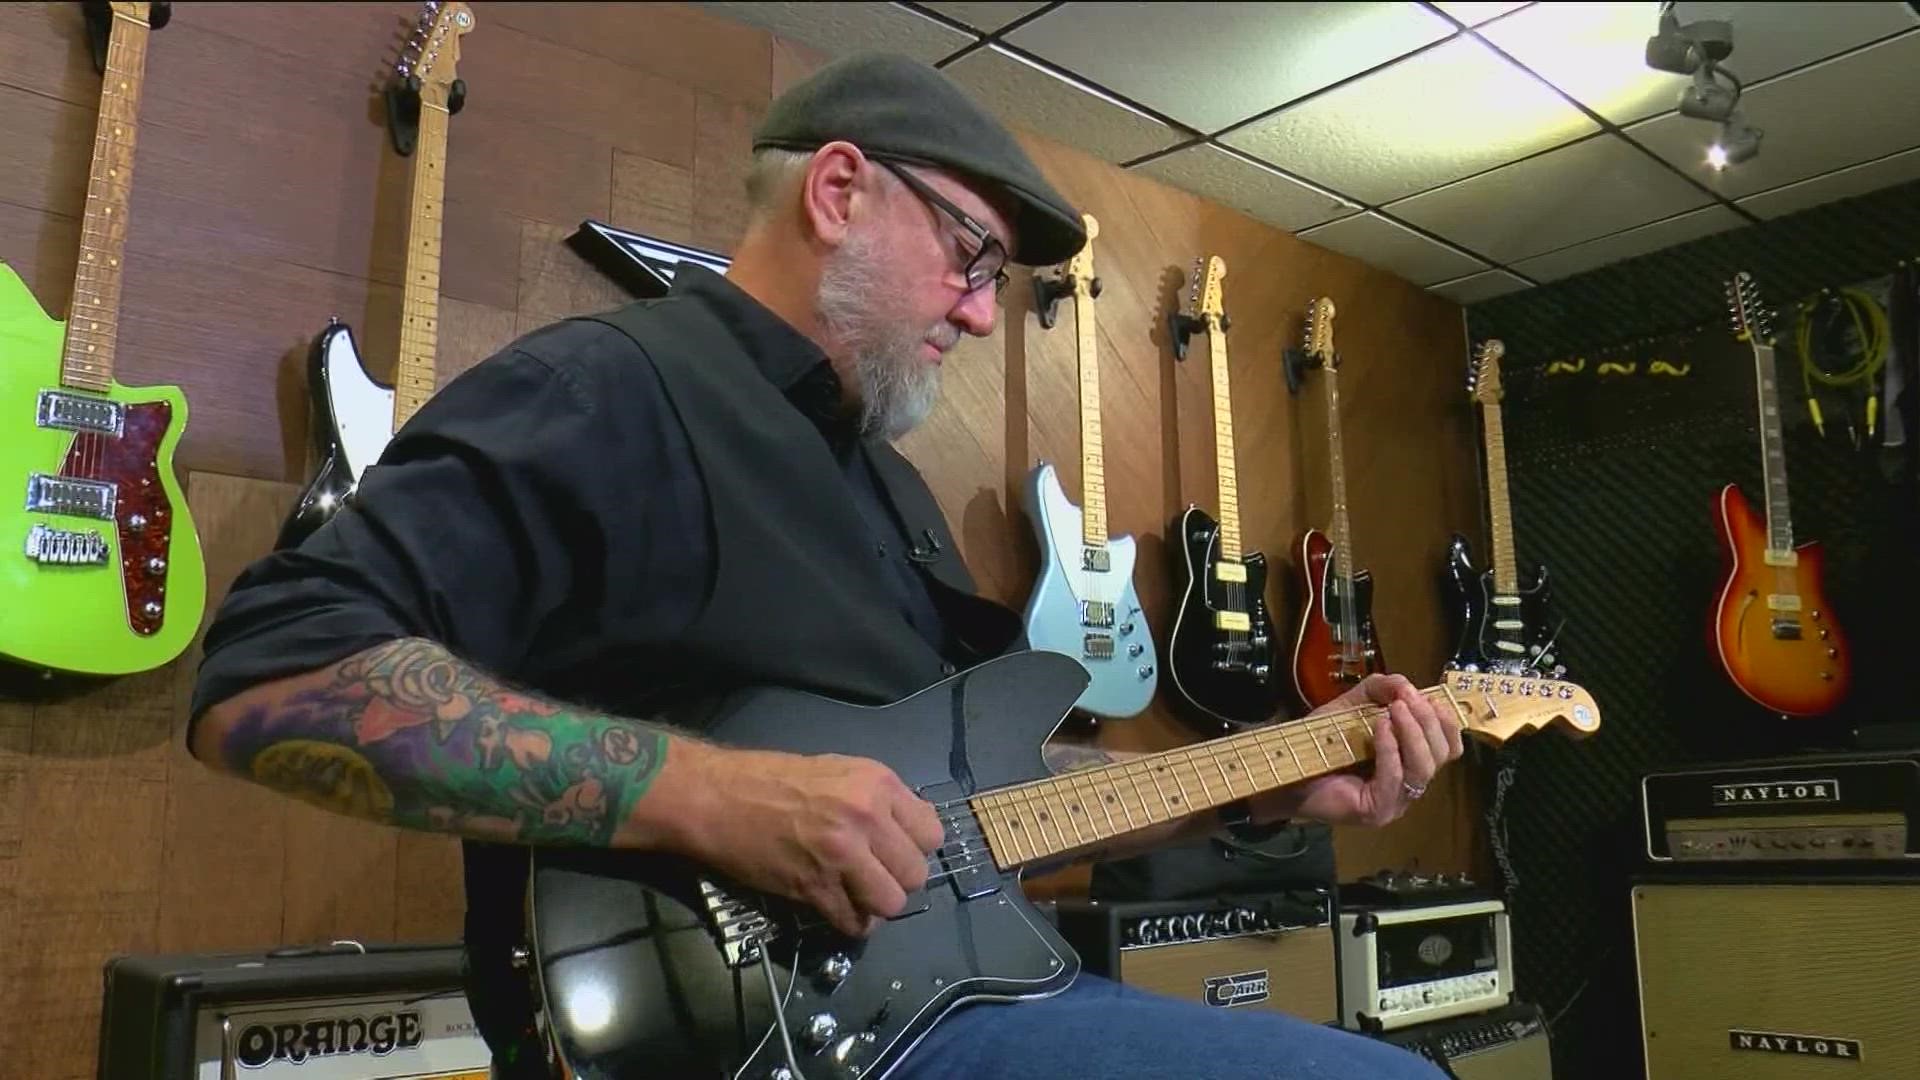 Reverend Guitars was born in Detroit in 1997 and settled in Toledo in 2010, after Ken and Penny Haas purchased the company and found a 'perfect spot' on Wilford Dr.